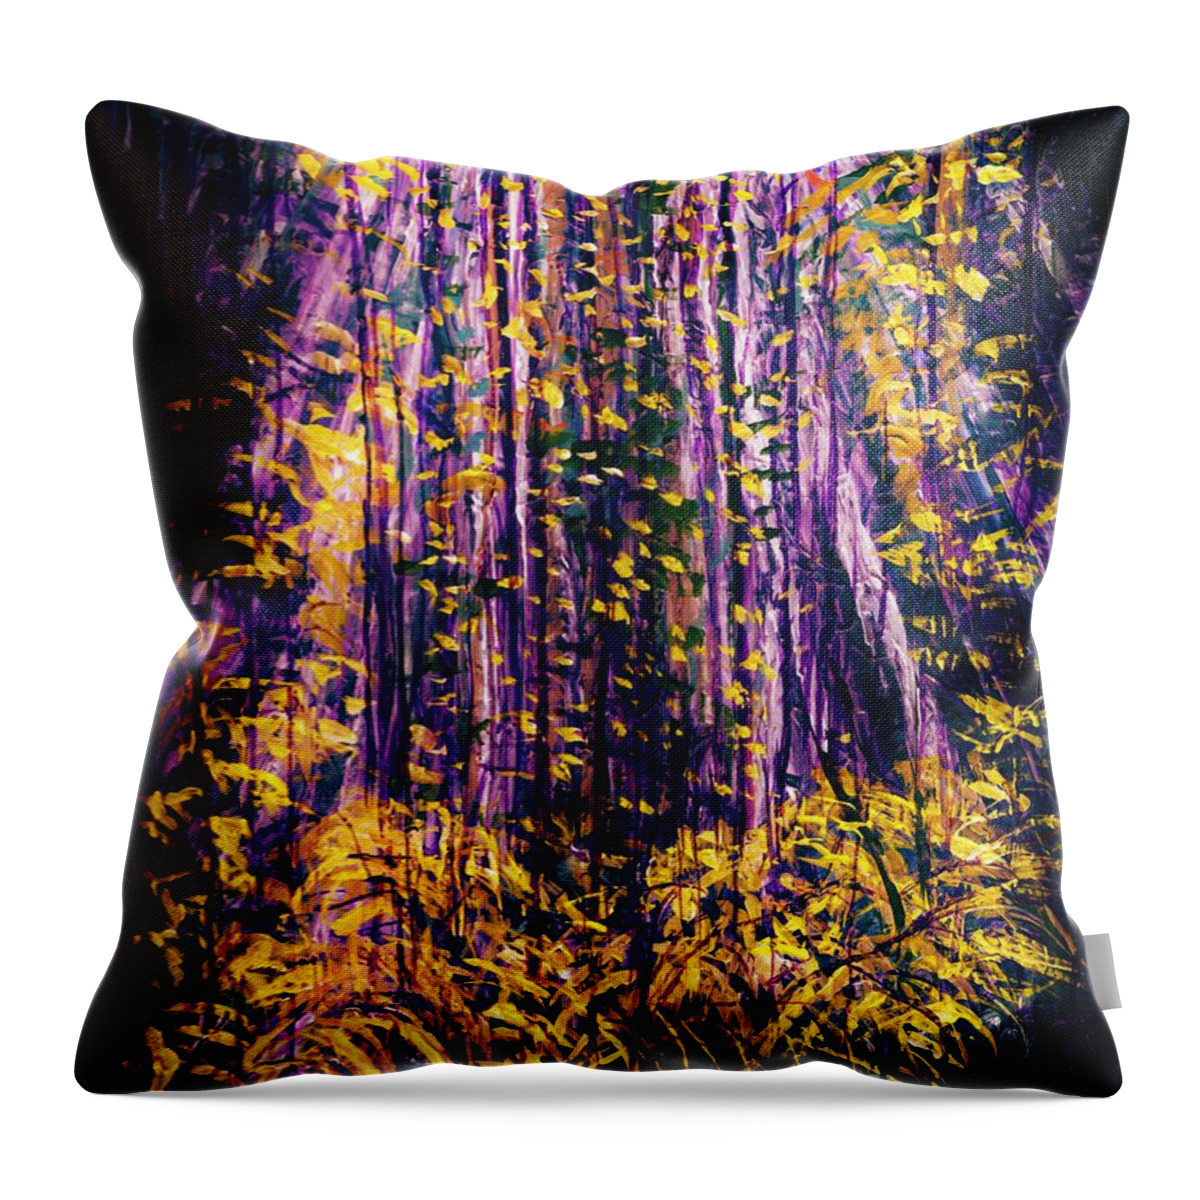 #rainforest #trees #forests #art #artist #beautiful #colorful #expressionism #greenliving #landscape #nature #natureaddict #newartwork #painting #trees Throw Pillow featuring the painting Rainforest by Allison Constantino